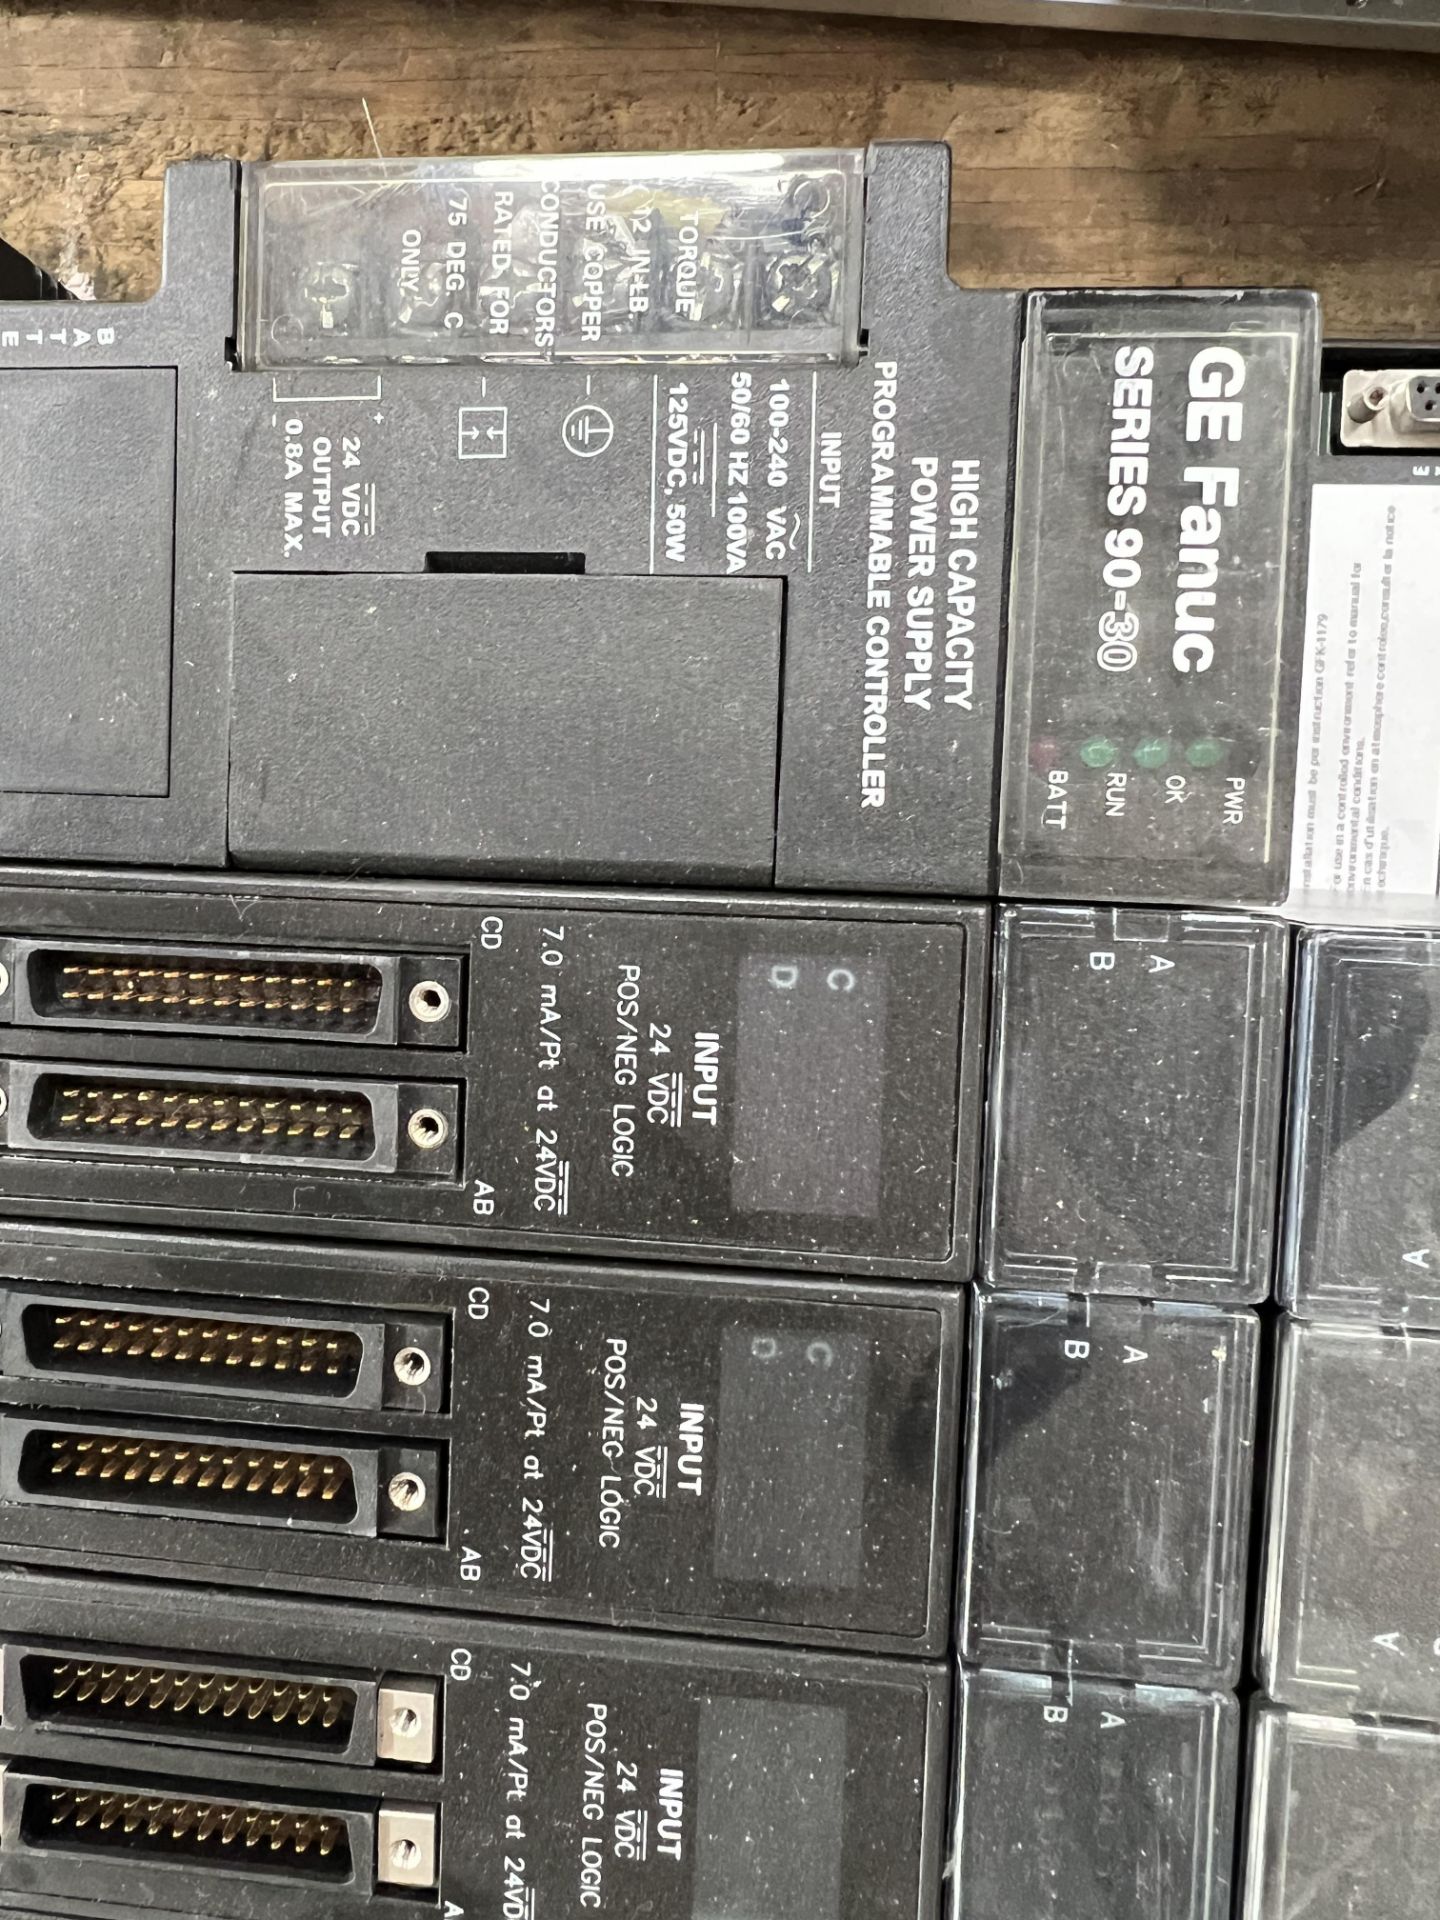 PALLET WITH APROX. (15) GE FANUC SERIES 90-30 PROGRAMMABLE CONTROLS AND D-SHAPED CONNECTORS - Image 2 of 4